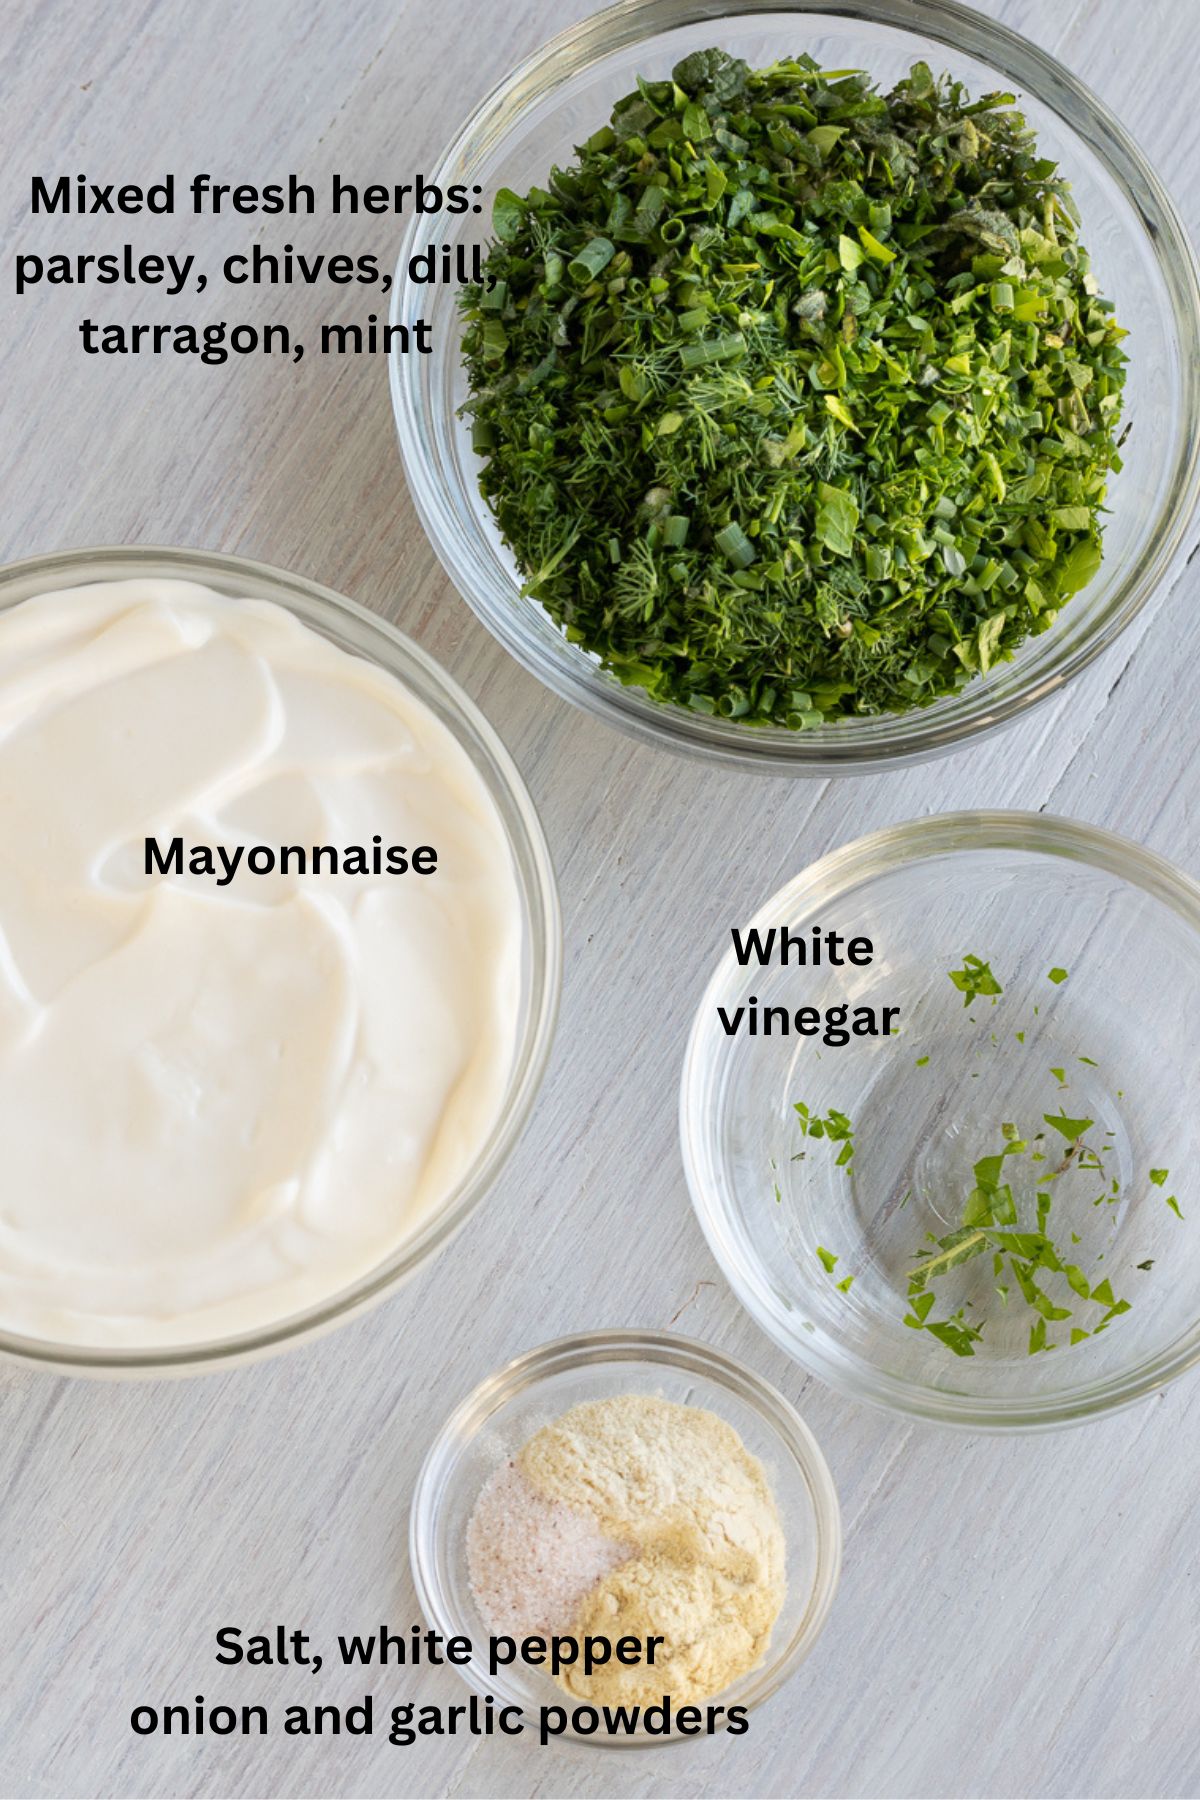 Ingredients for green goddess dressing and dip with lots of fresh green herbs.